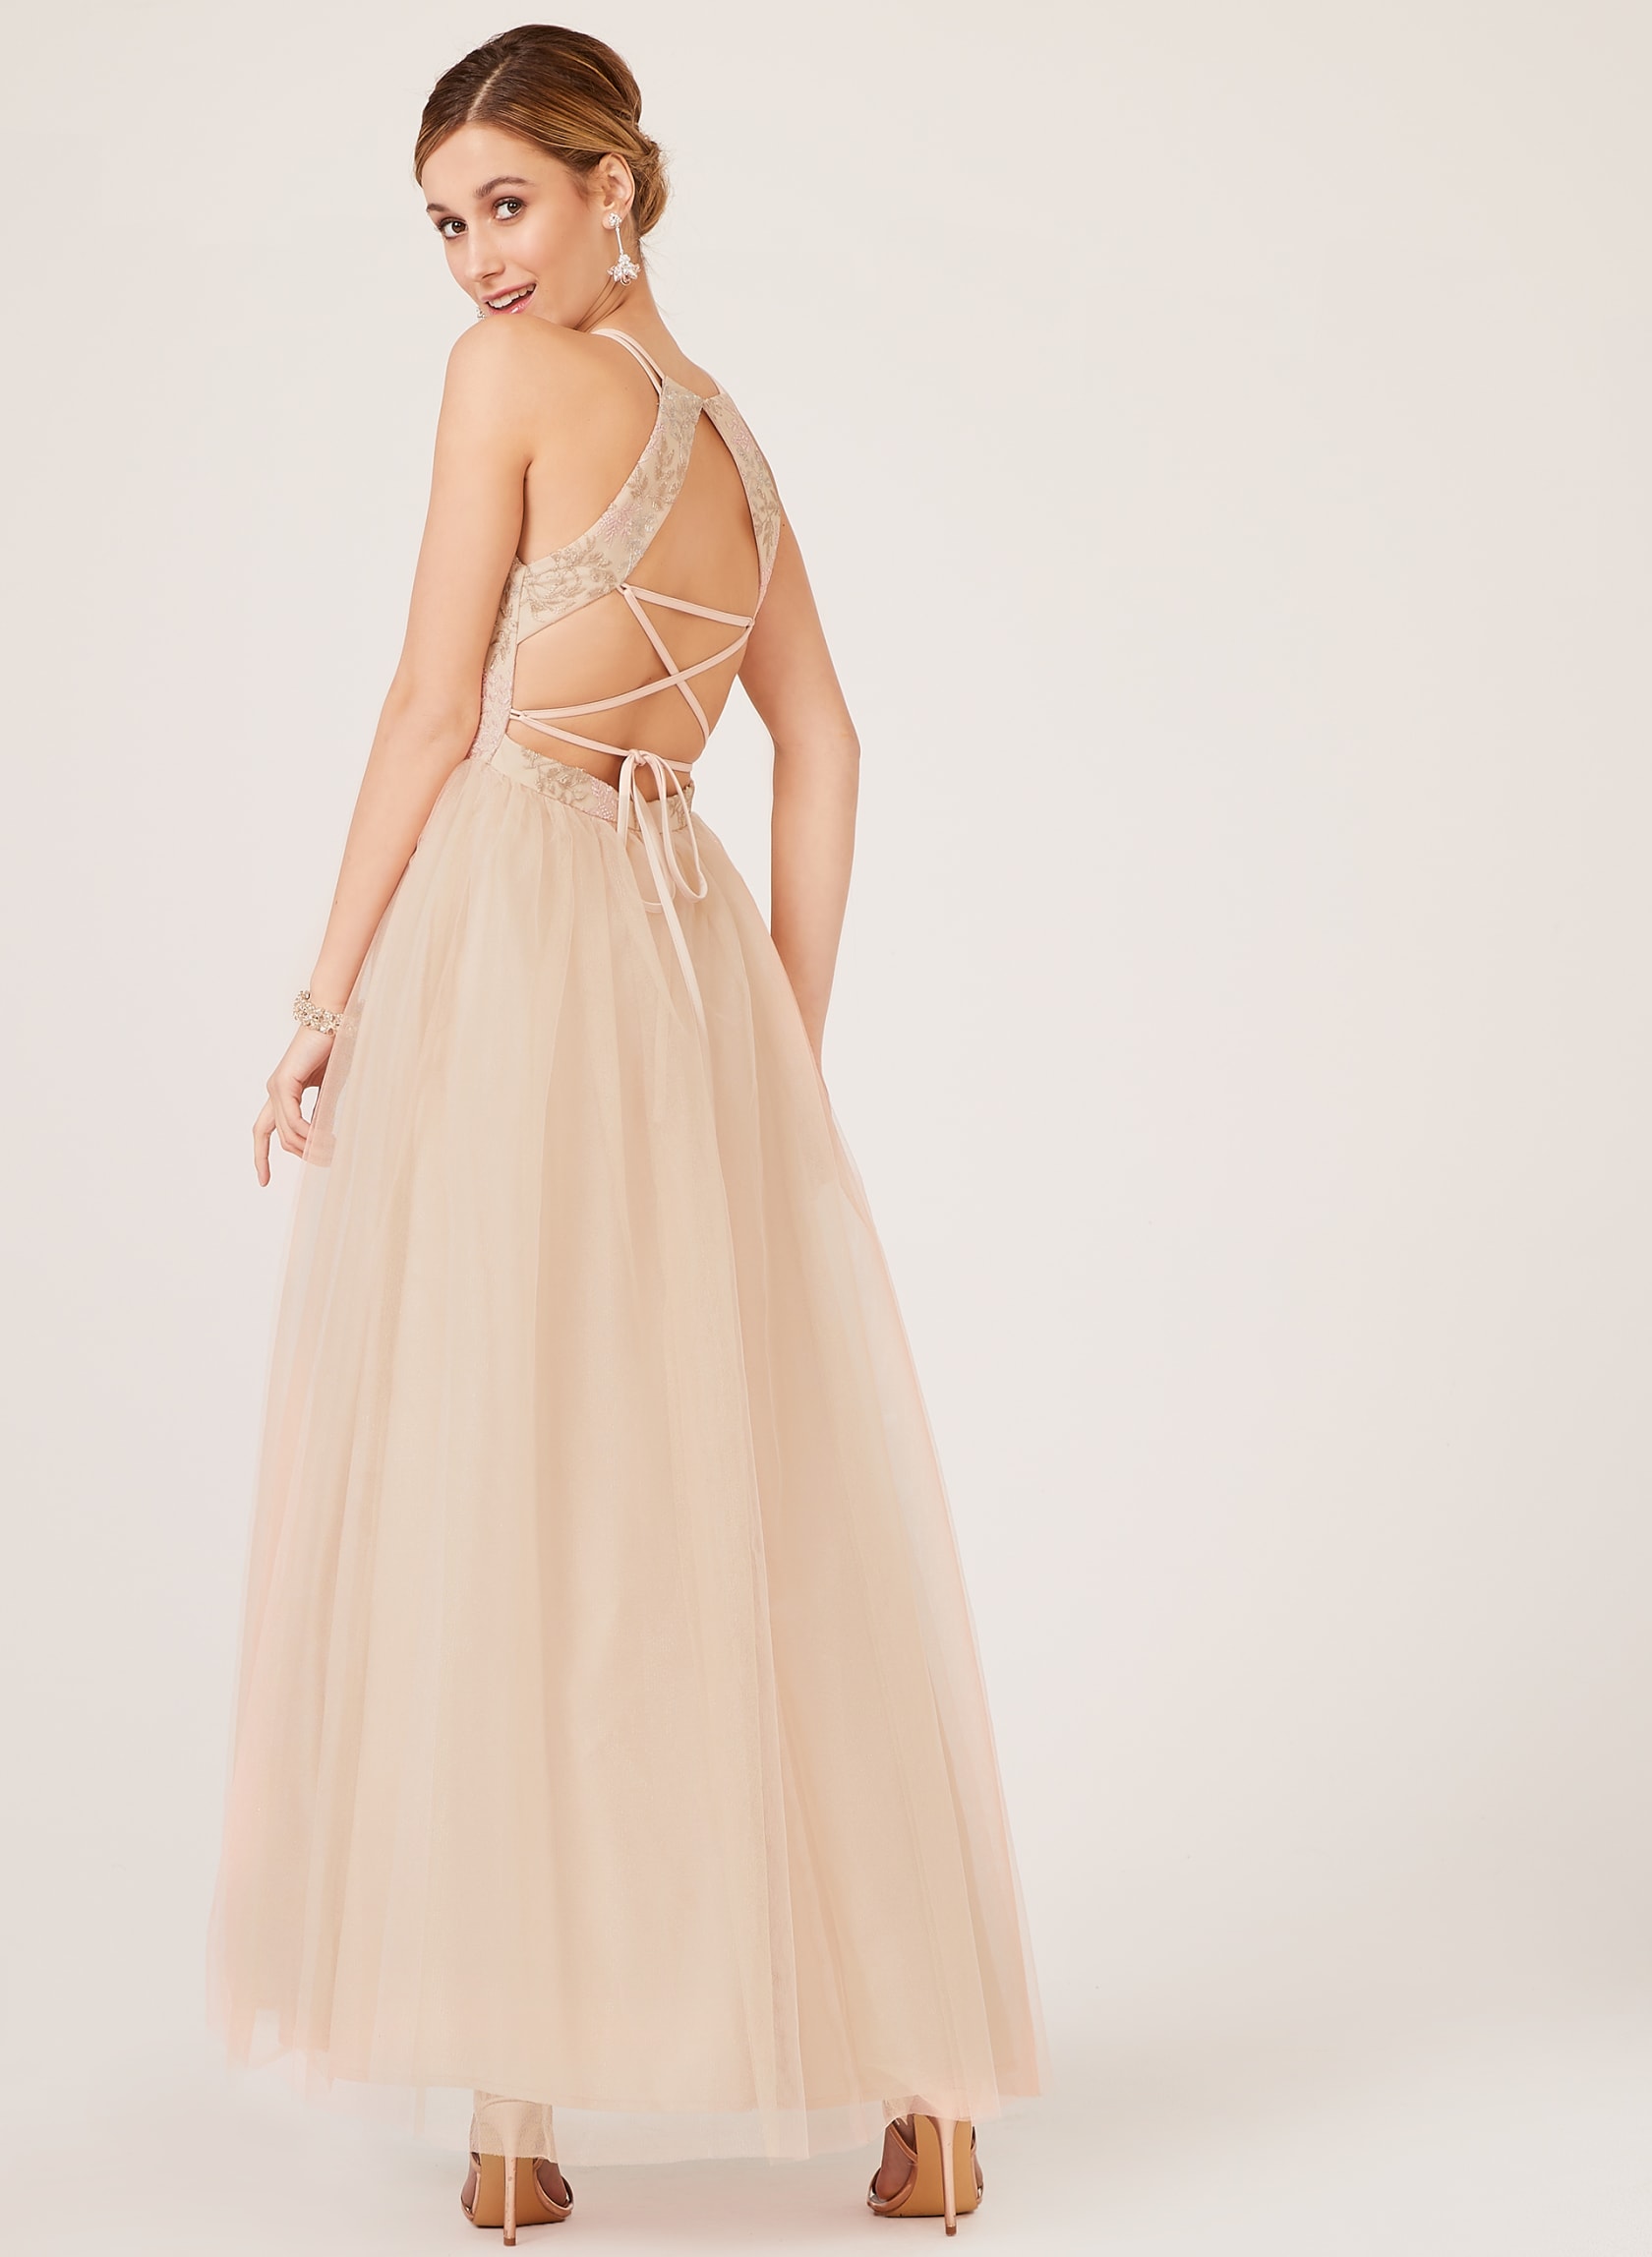 Lace Up Open Back Tulle Dress | Laura